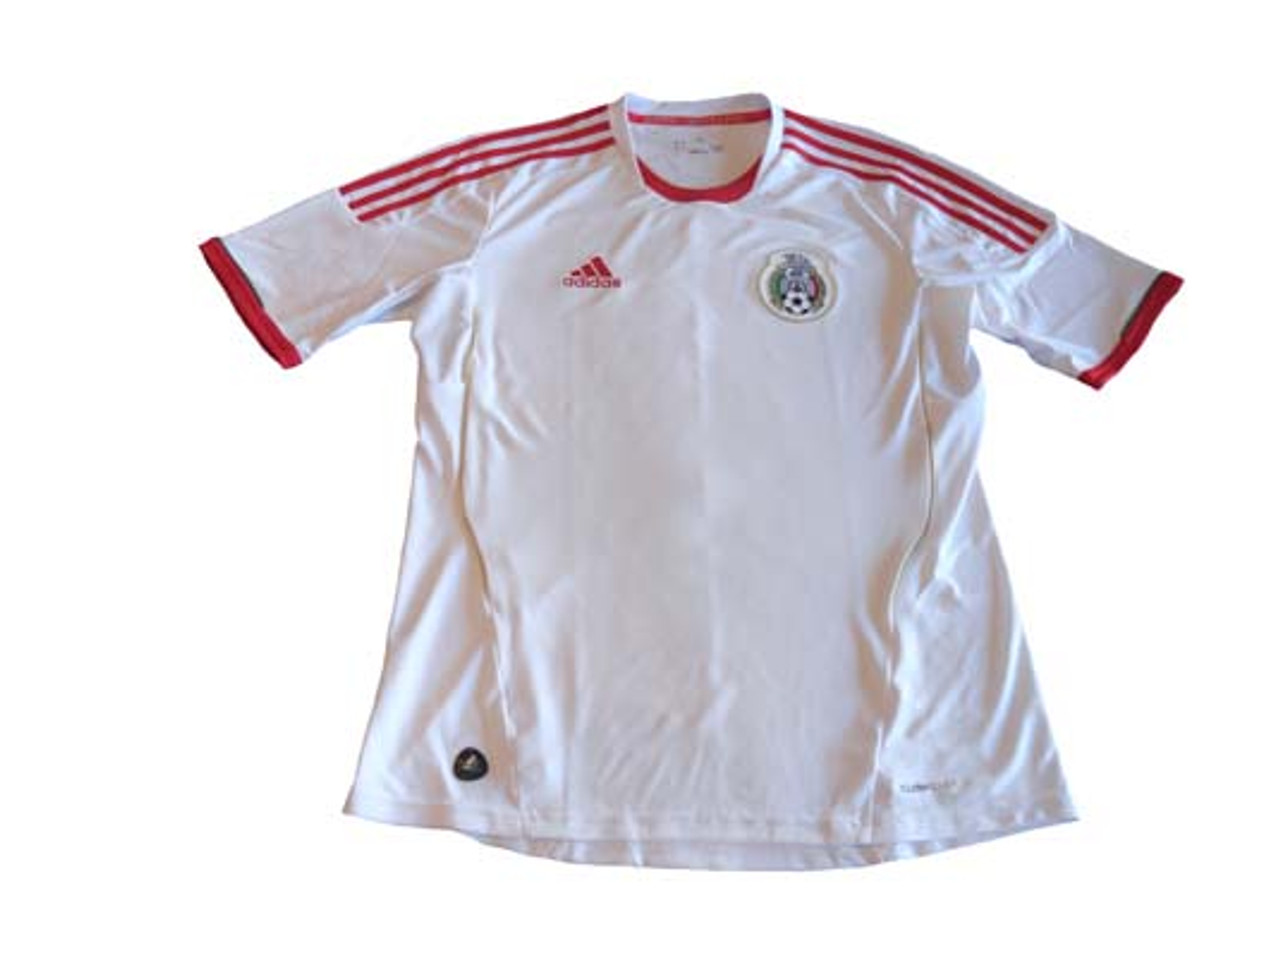 mexico 2012 jersey